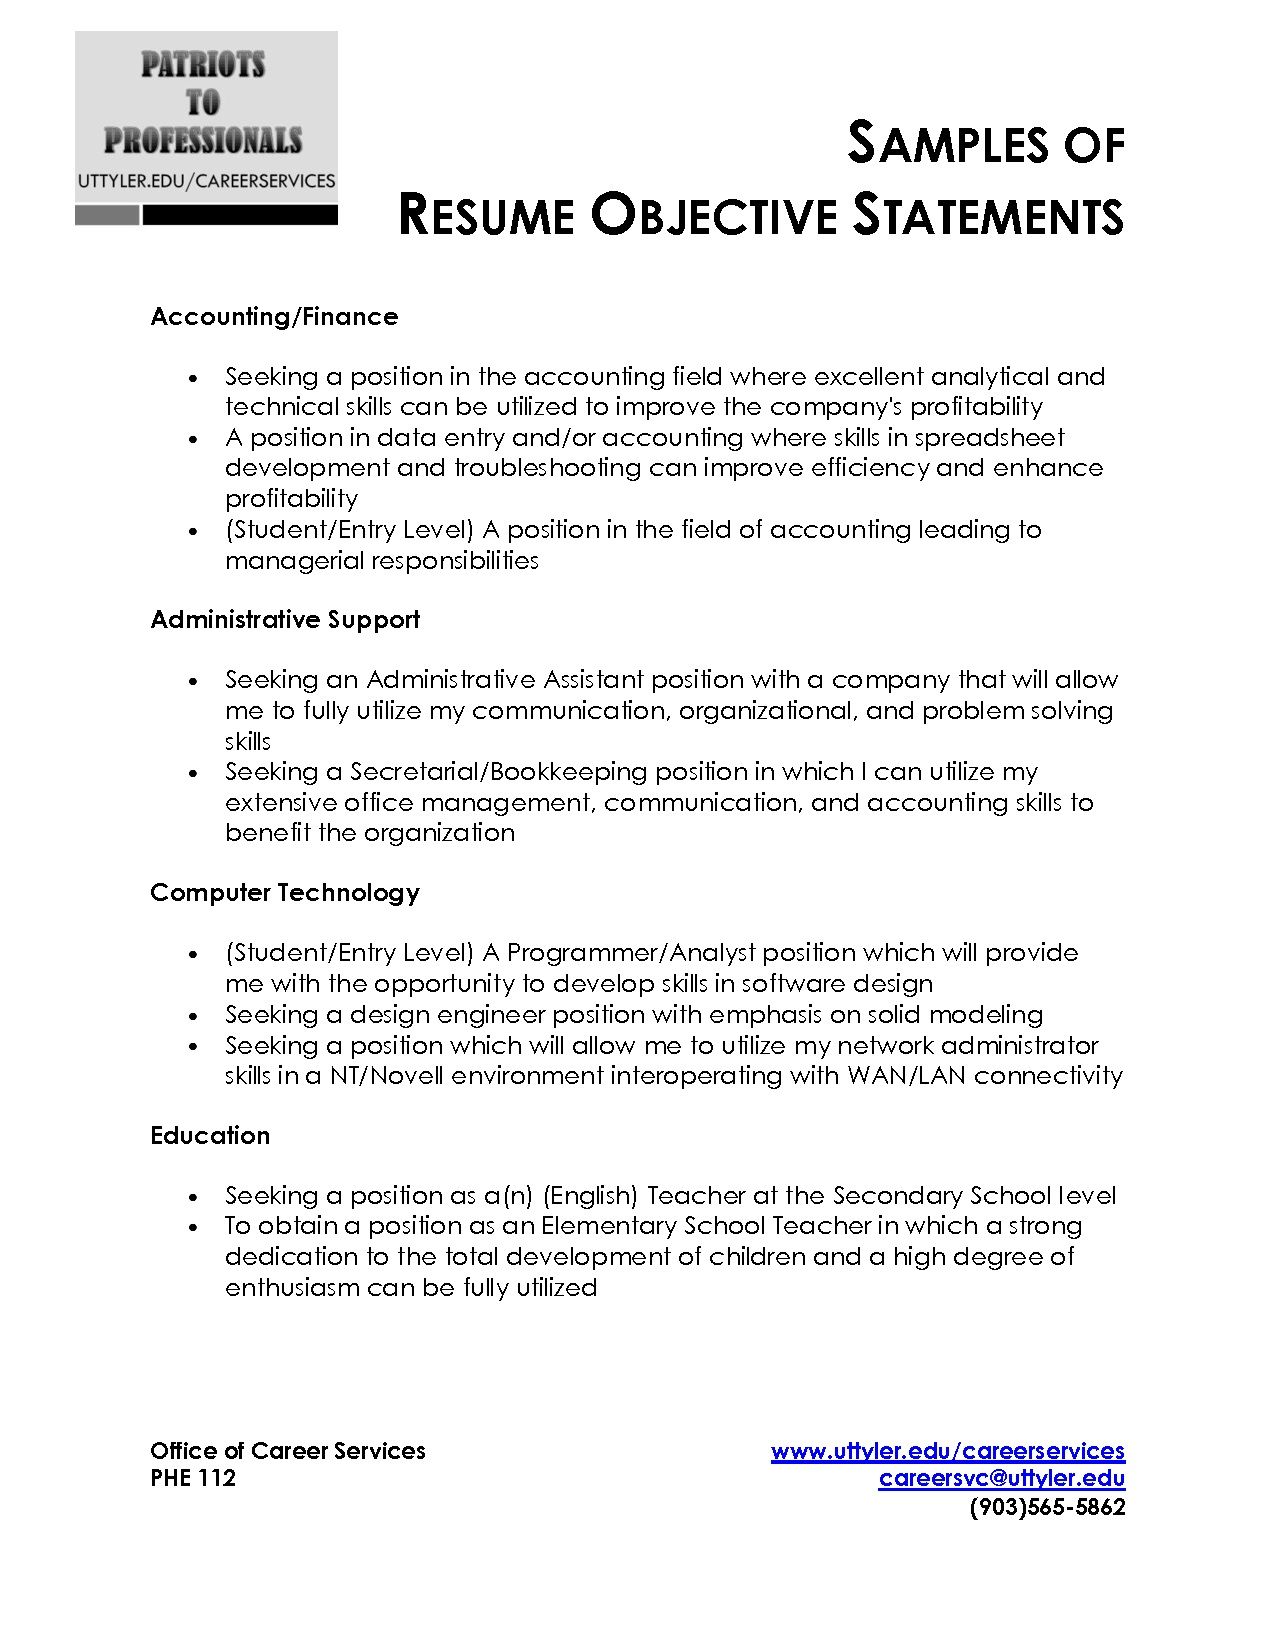 How To Write A Objective Statement For Resume - Master Your Resume